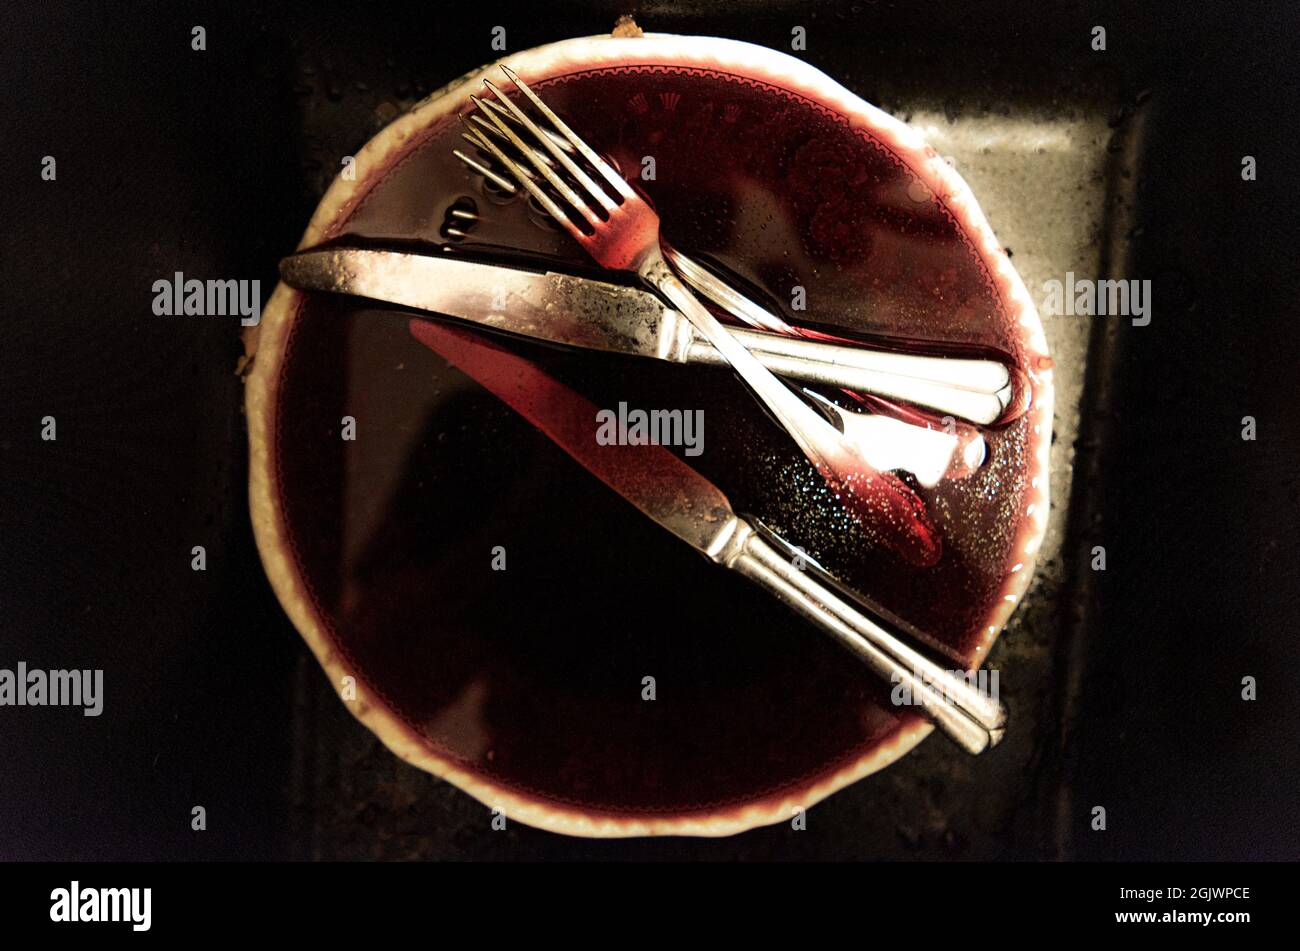 cutlery on a plate with blood Stock Photo